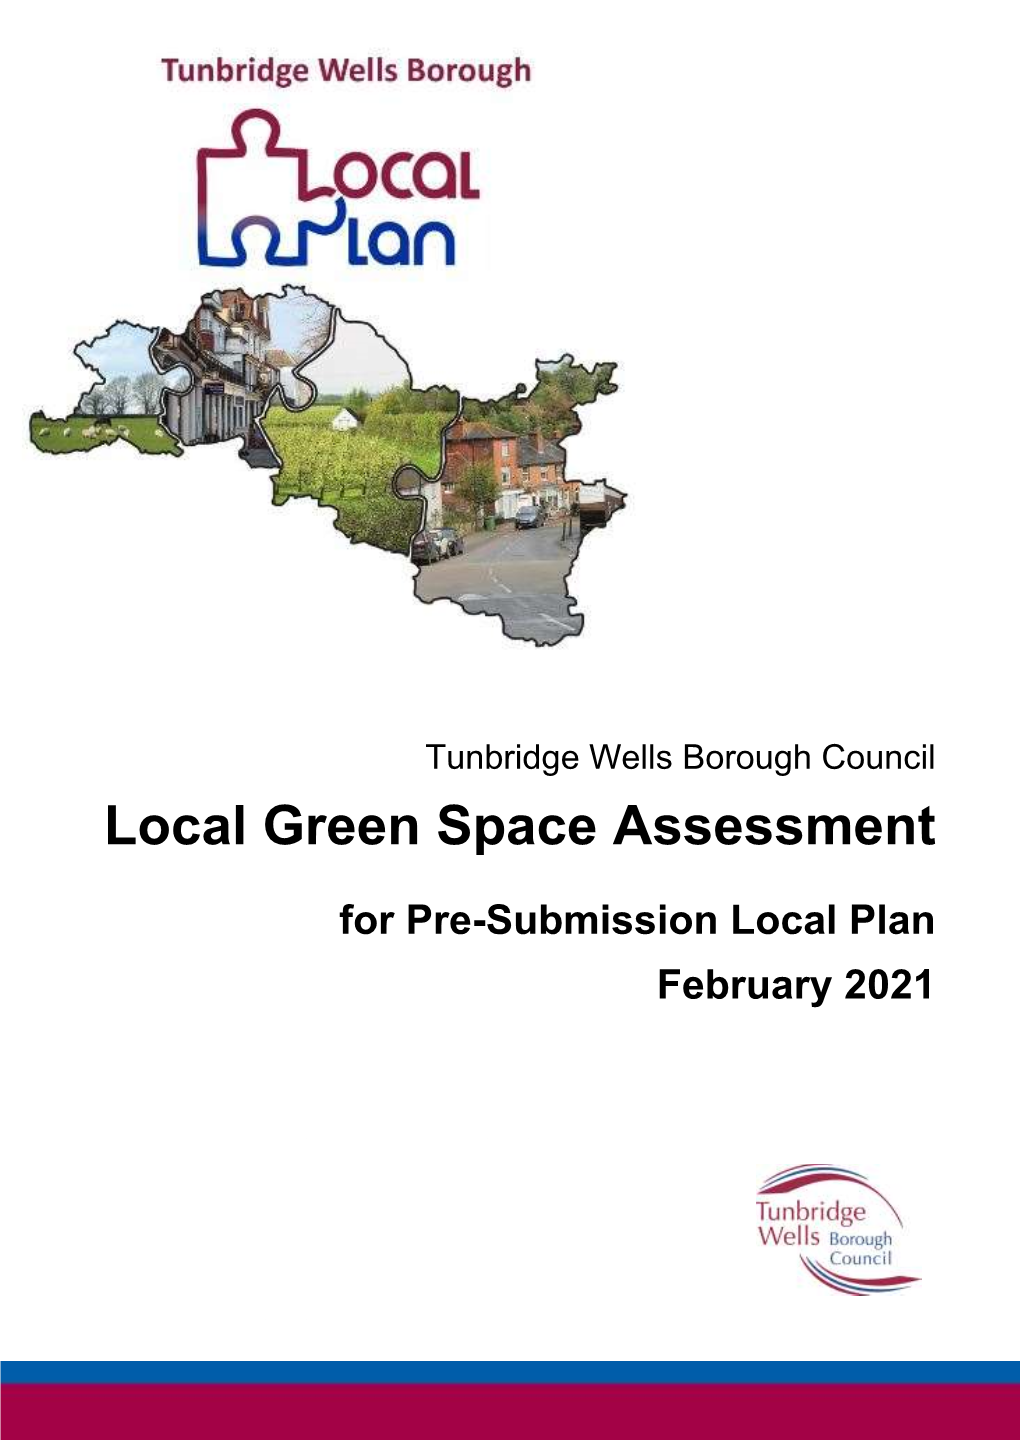 Local Green Space Assessment 2021